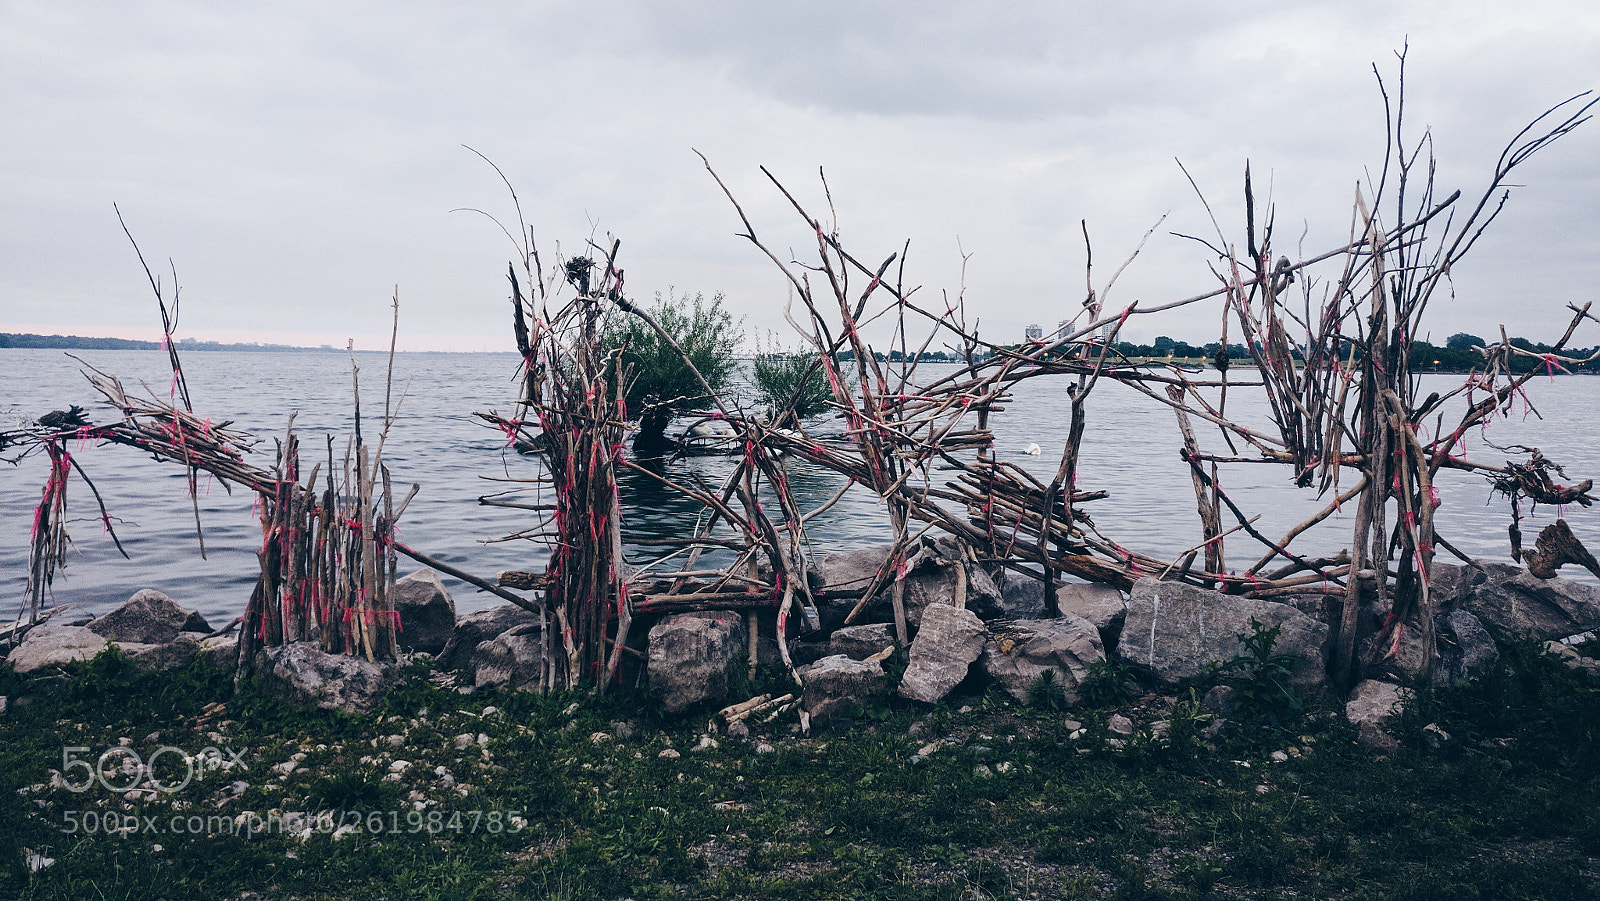 OnePlus A3000 sample photo. Driftwood sculpture photography